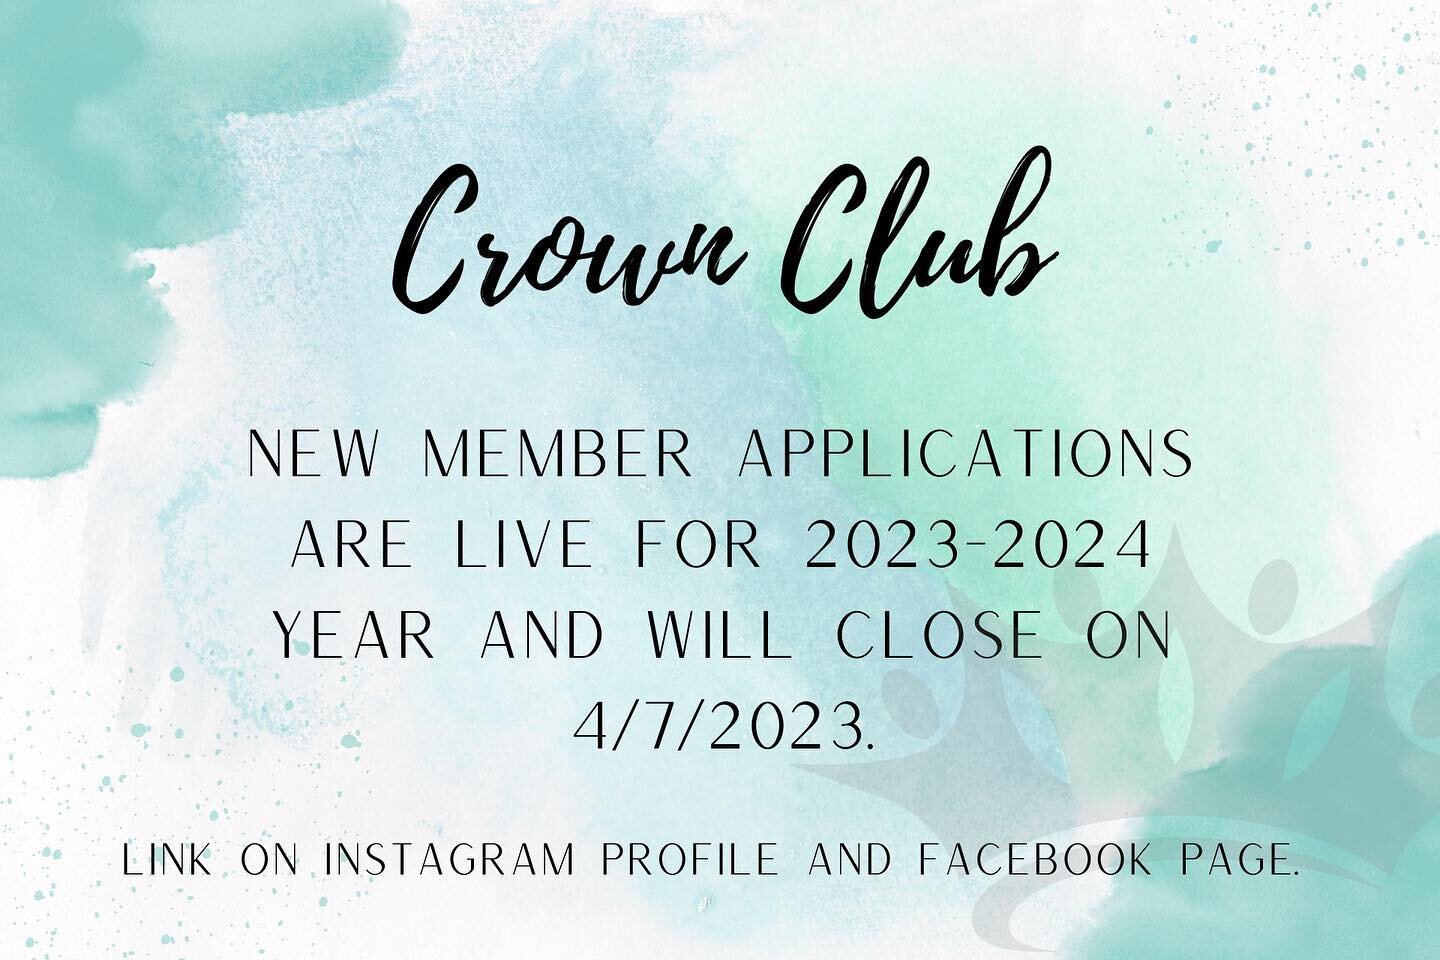 We are excited to welcome new members for the 2023-2024 year! The link for applications can be found in our bio with additional information about requirements provided on application! Please fill out by 4/7/2023!